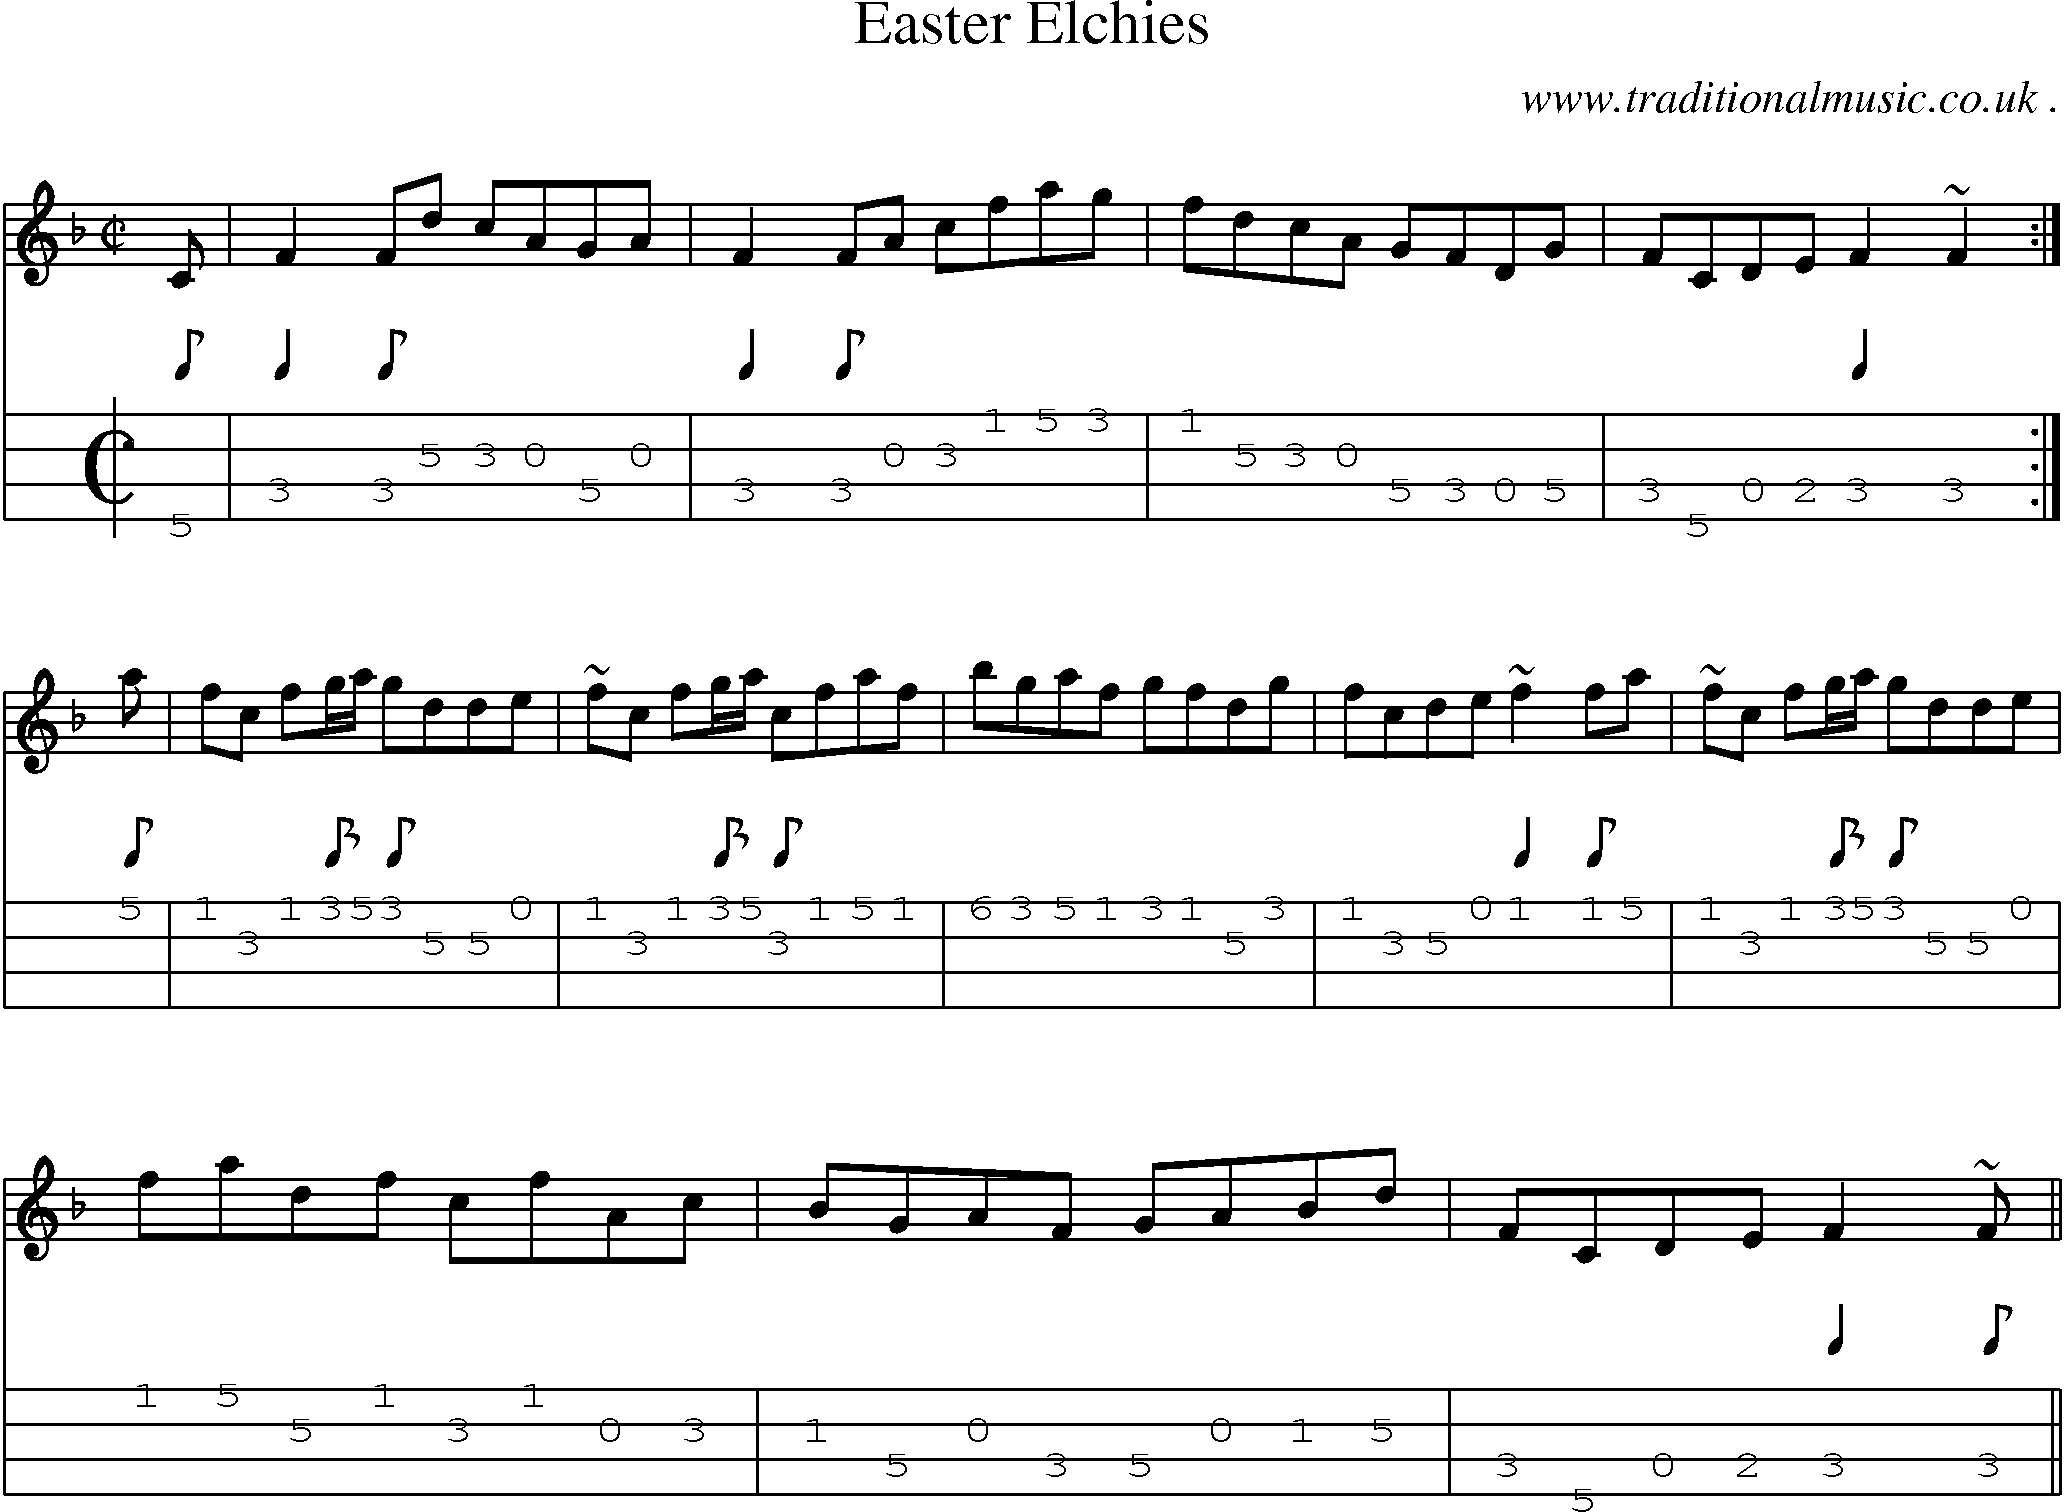 Sheet-music  score, Chords and Mandolin Tabs for Easter Elchies